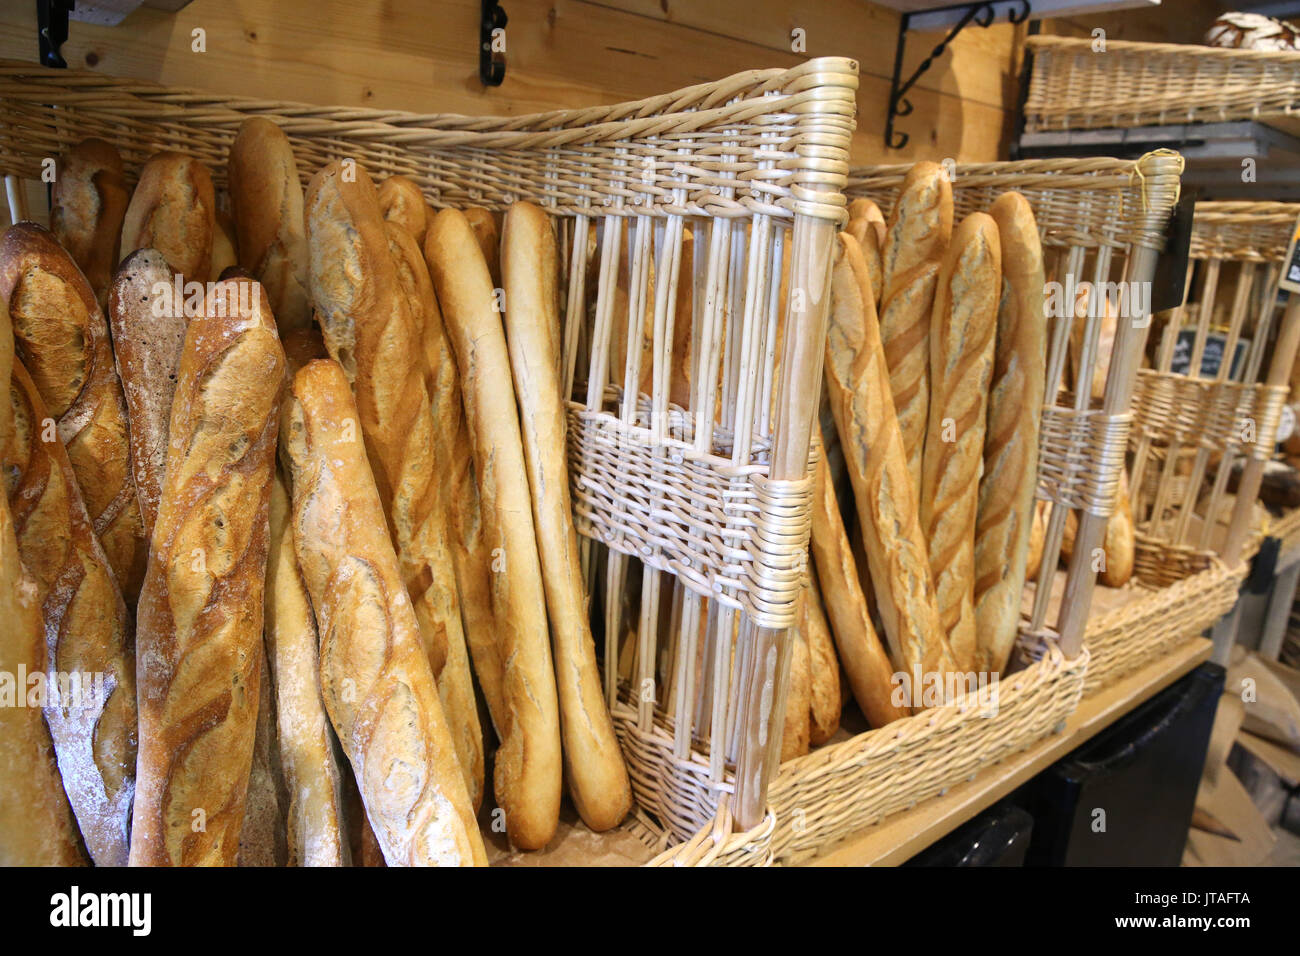 Bakery, French baguettes, Haute-Savoie, France, Europe Stock Photo